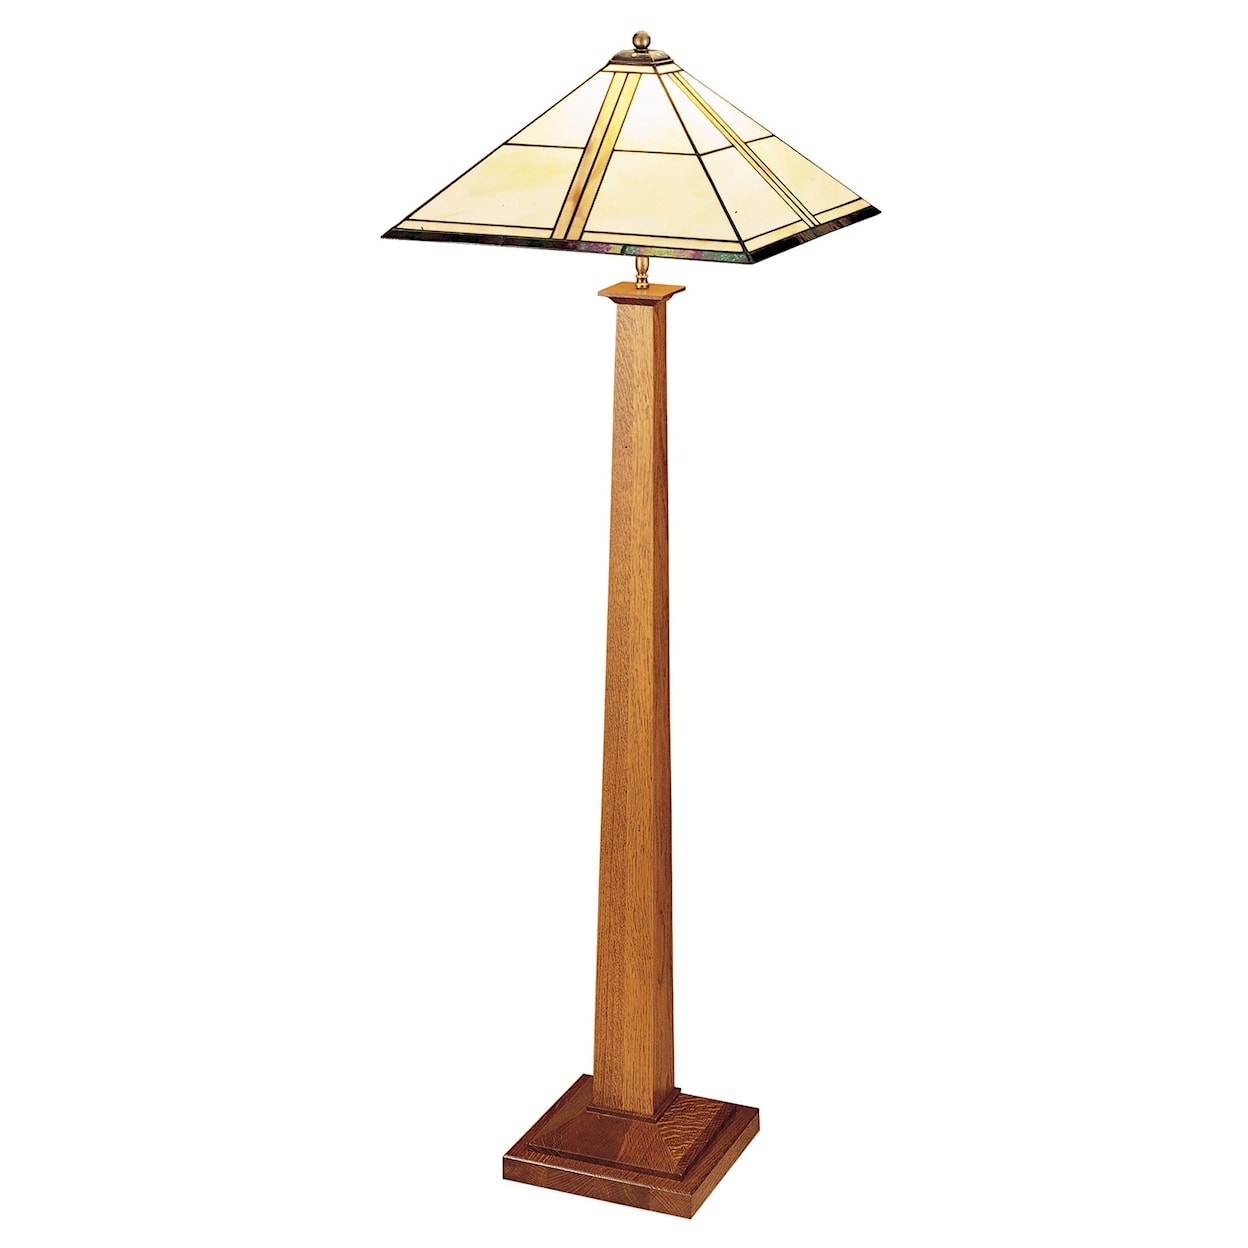 Stickley Mission Square Base Floor Lamp with Art Glass Shade